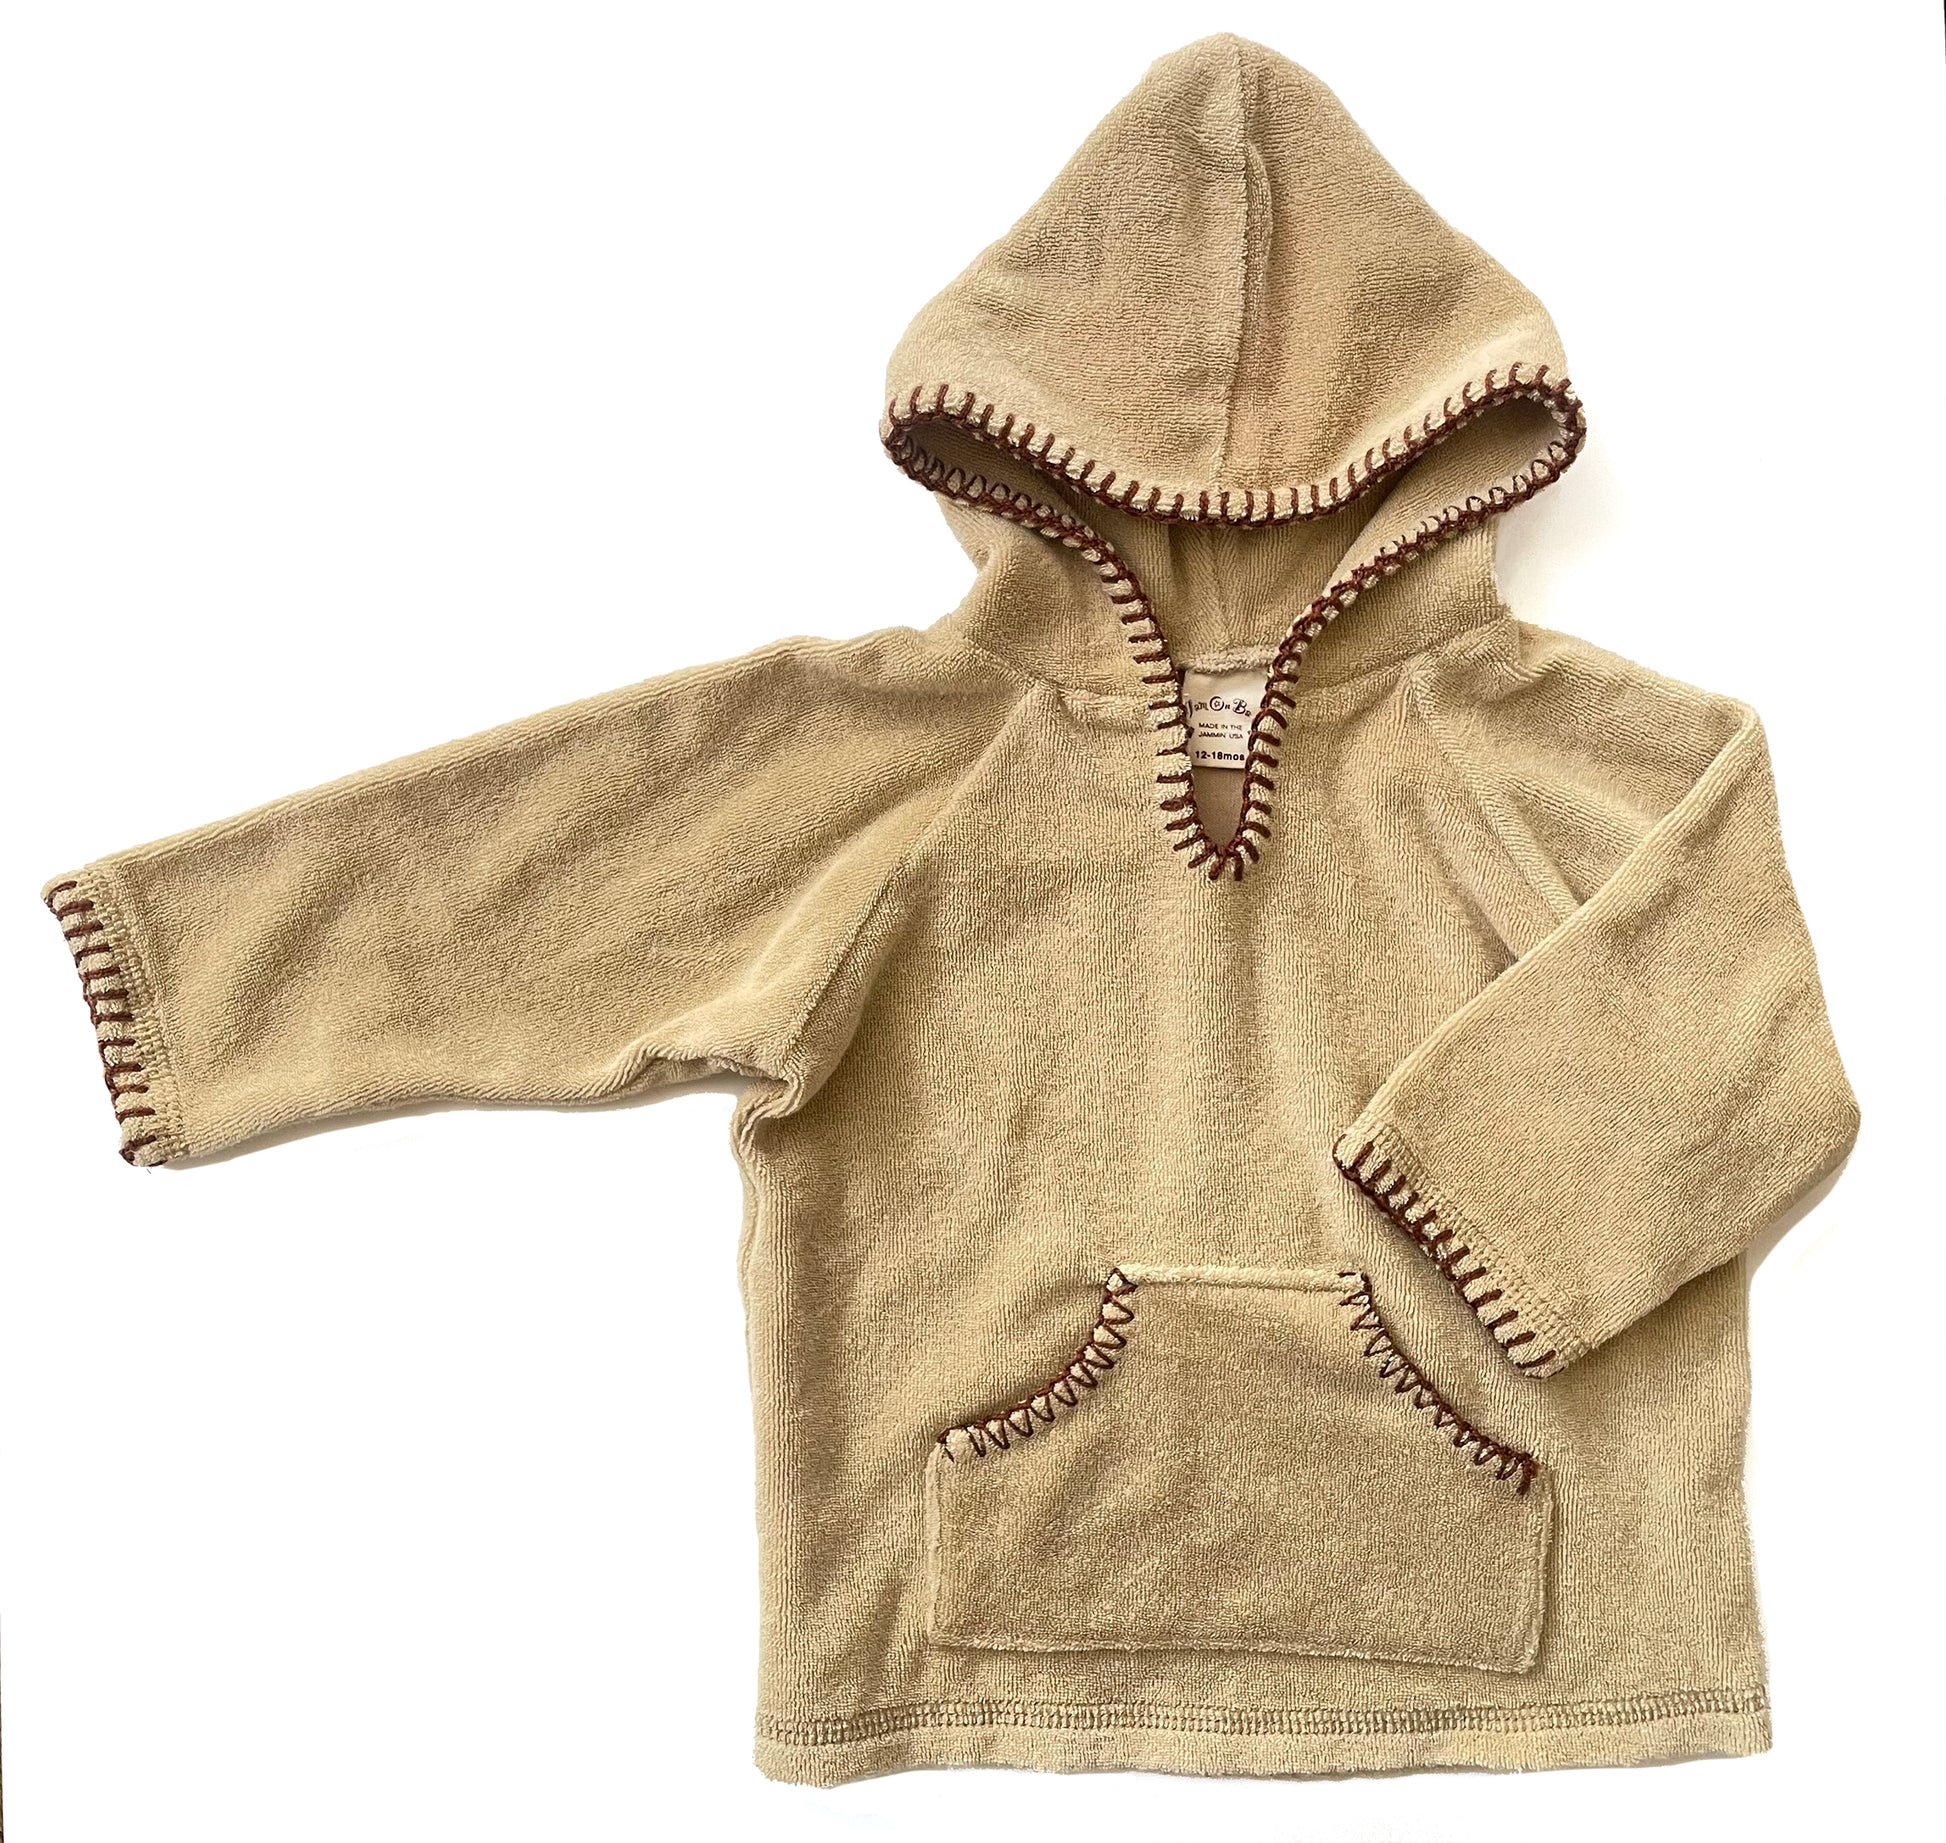 Cozy cover up 'aprés beach' set in the softest, cotton terry fabric with blanket stitch trim detail on both hoodie and elastic waist pant. Kanga pocket on hoodie for little treasures. Fabric color: Sand / Trim color: Chocolate 85% Cotton / 15% Poly Machine washable, cold. Dry on low heat. Made in California